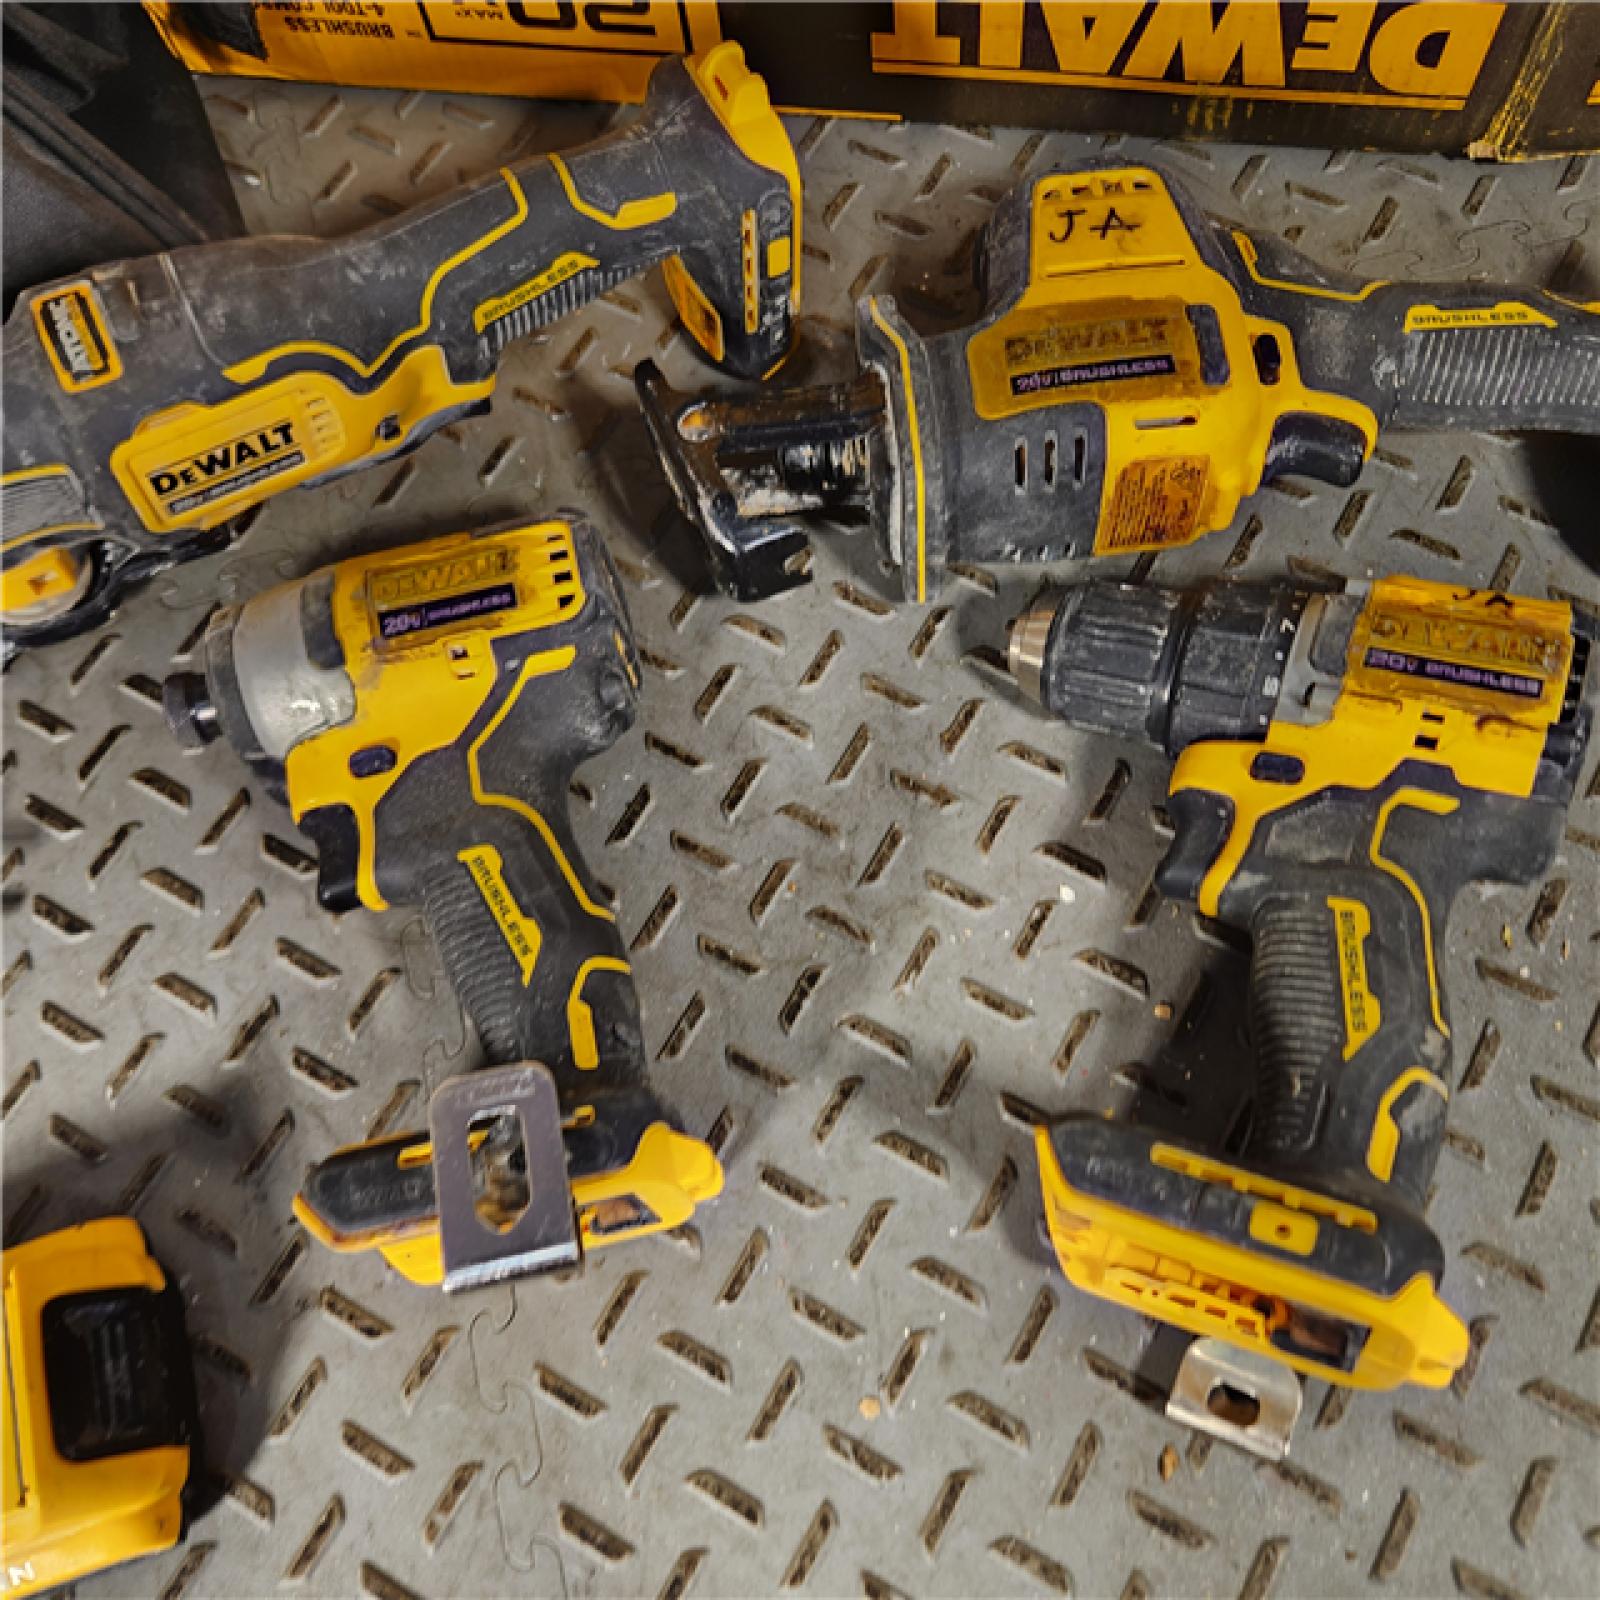 Houston Location - AS-IS DEWALT ATOMIC 20-Volt Lithium-Ion Cordless Brushless Combo Kit (4-Tool) with (2) 2.0Ah Batteries, Charger and Bag - Appears IN USED Condition